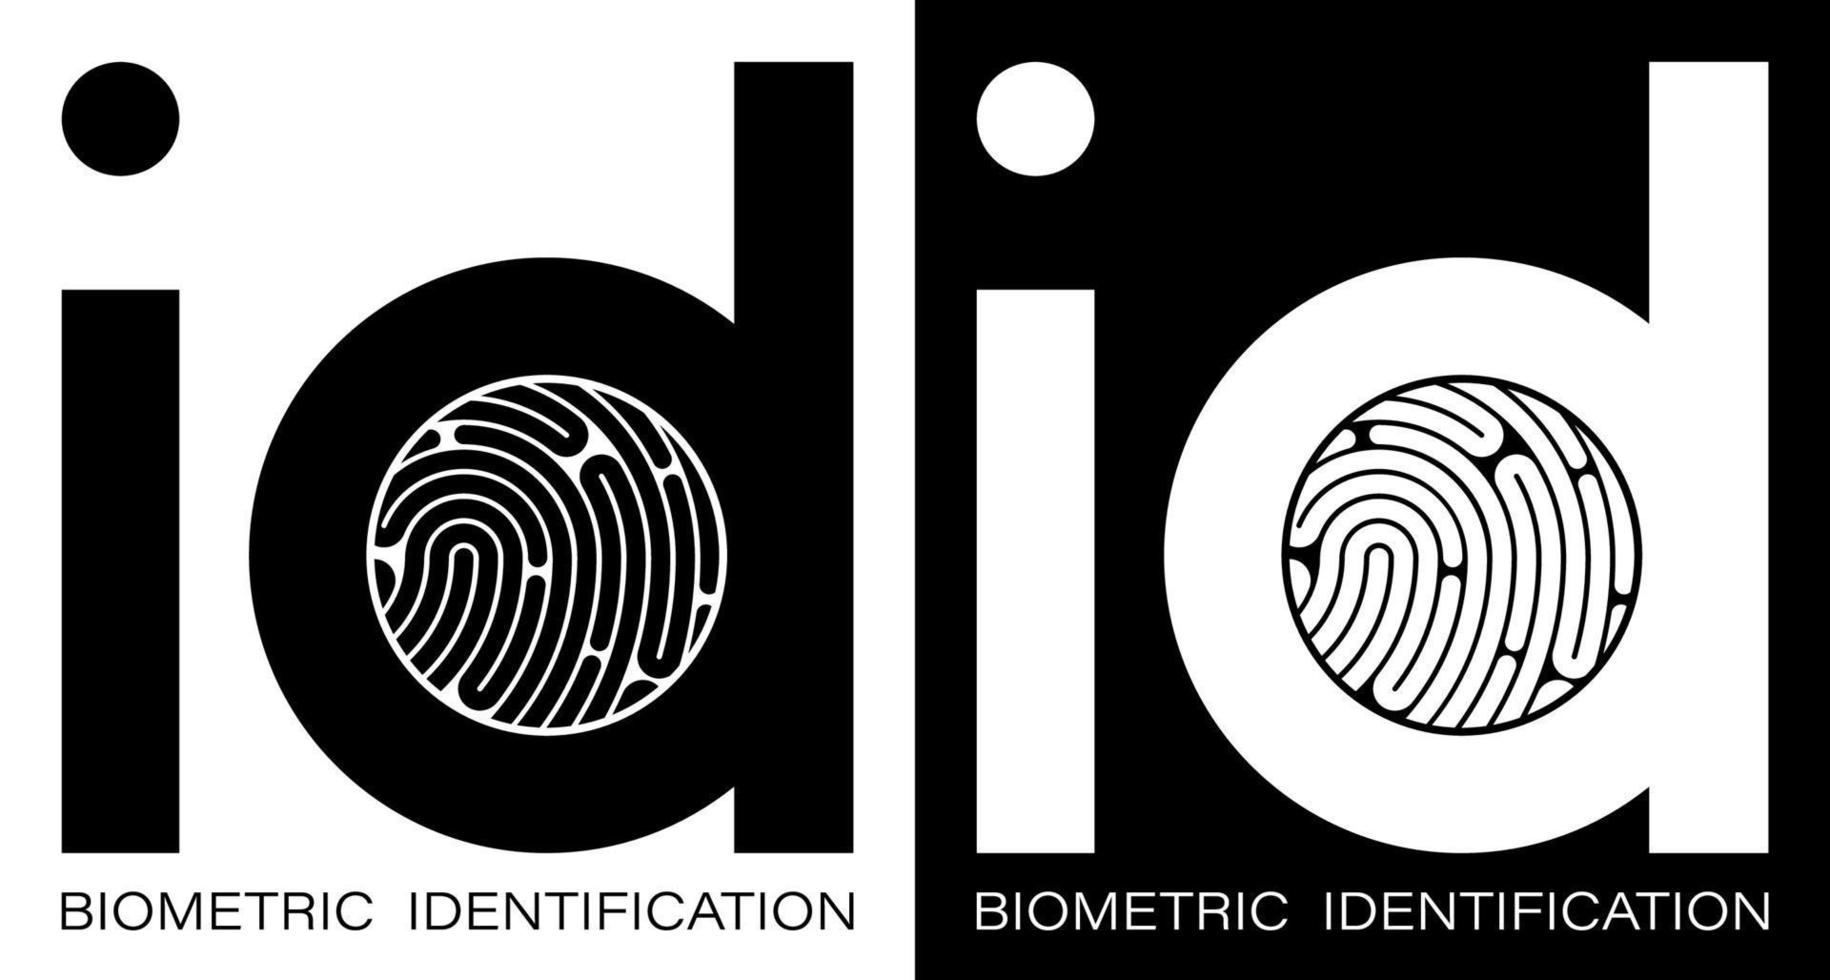 ID fingerprint icon for mobile identification apps. Biometric identification of human data. Unique pattern on finger. Search devices for scanning data. Vector